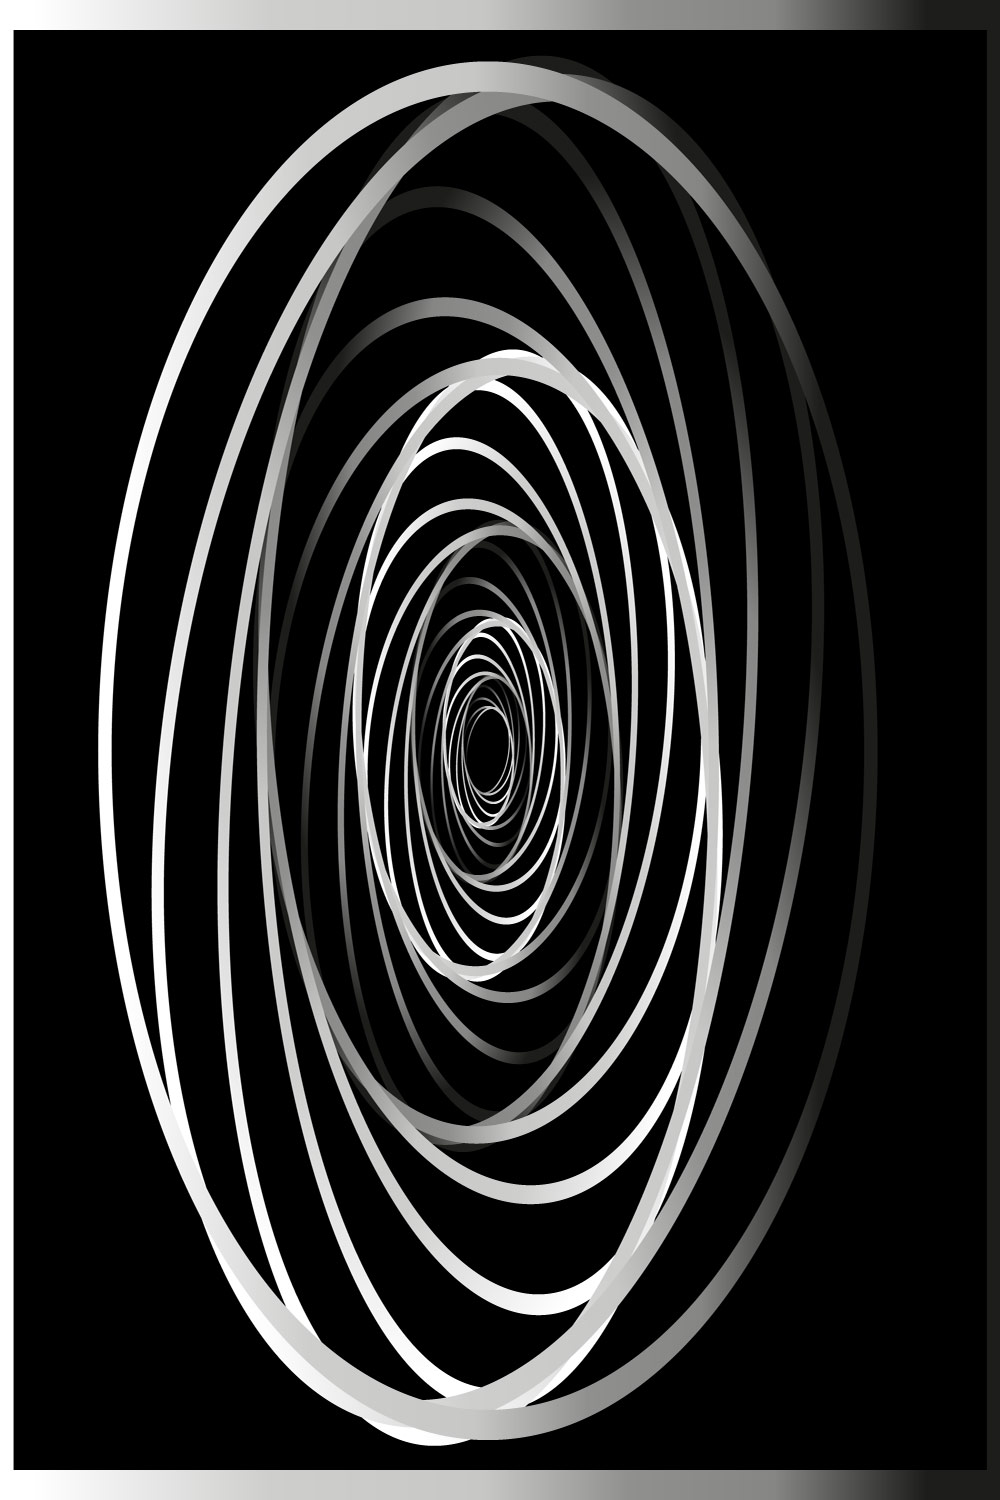 Gradient background with black and white spirals pinterest preview image.